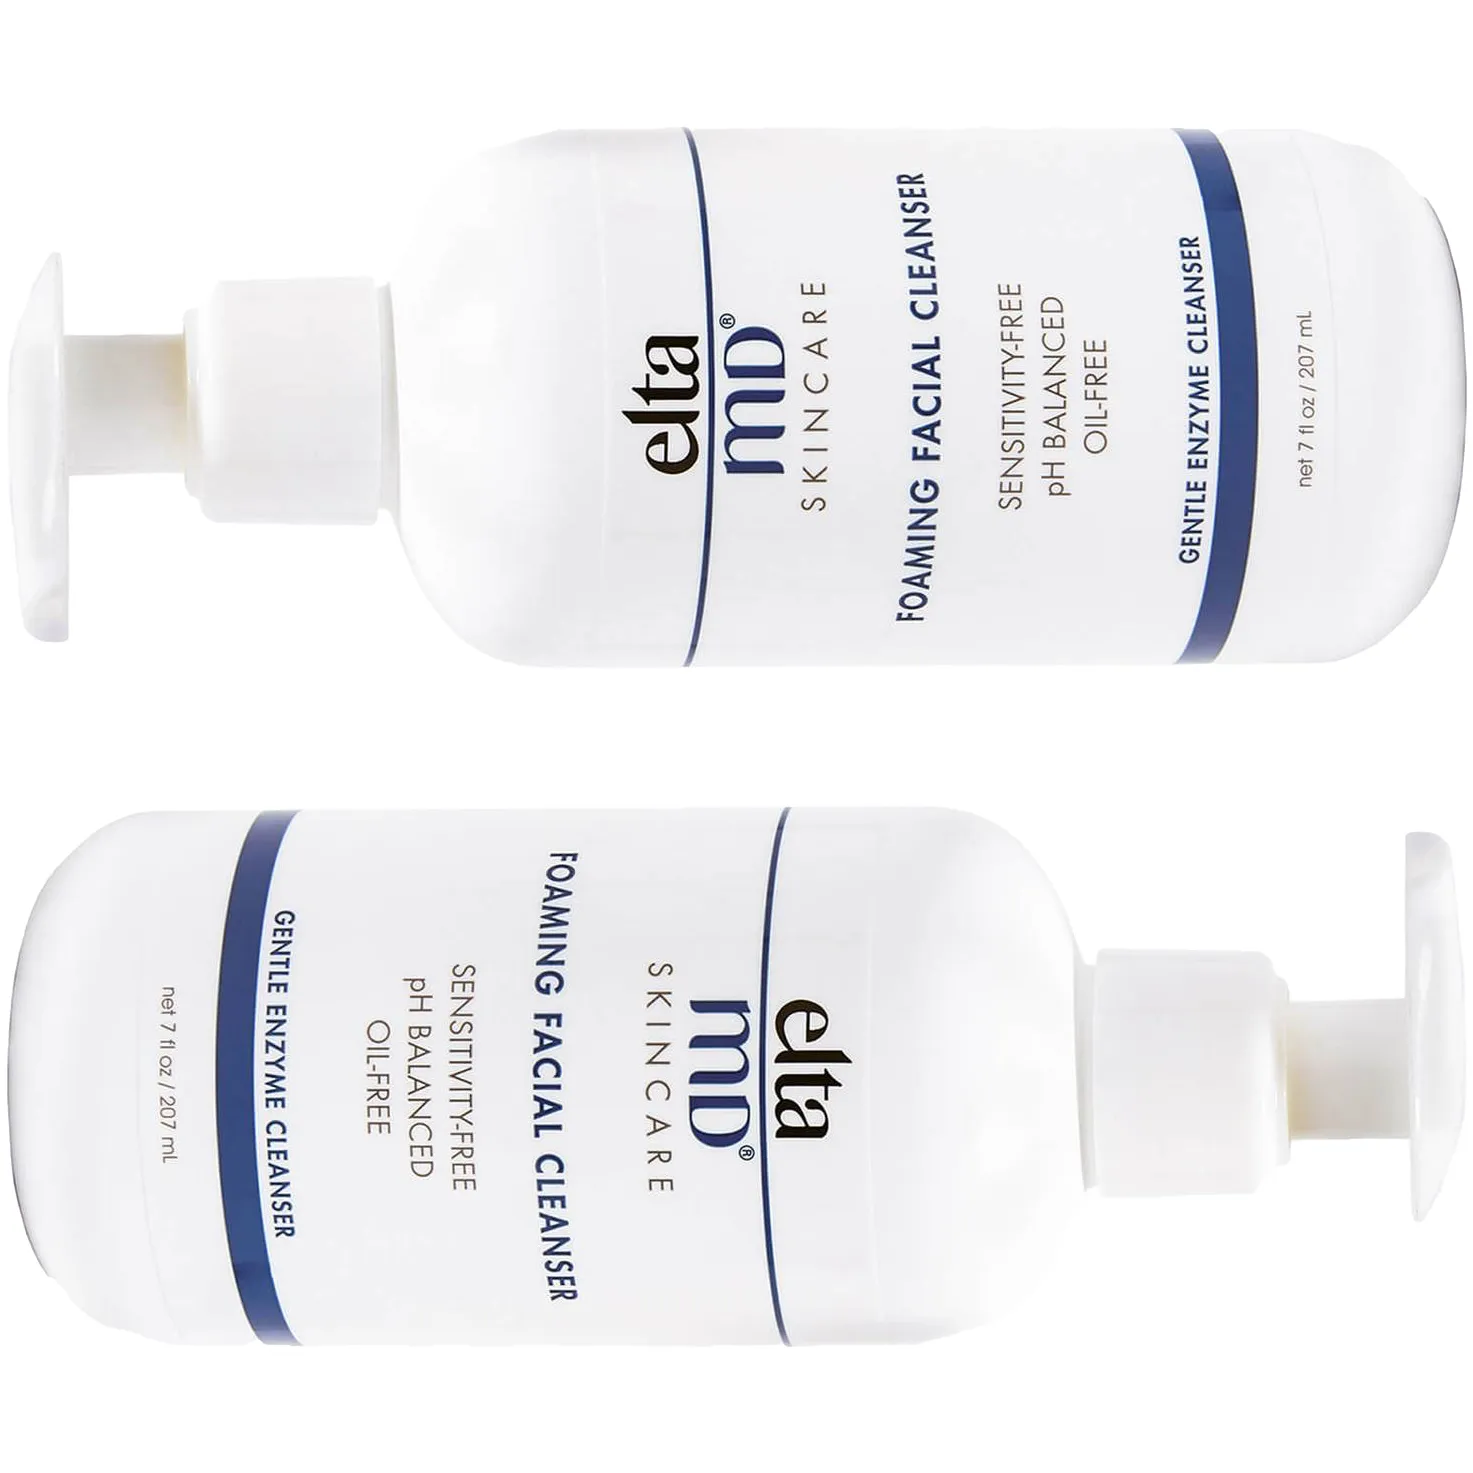 Free EltaMD Foaming Facial Cleanser